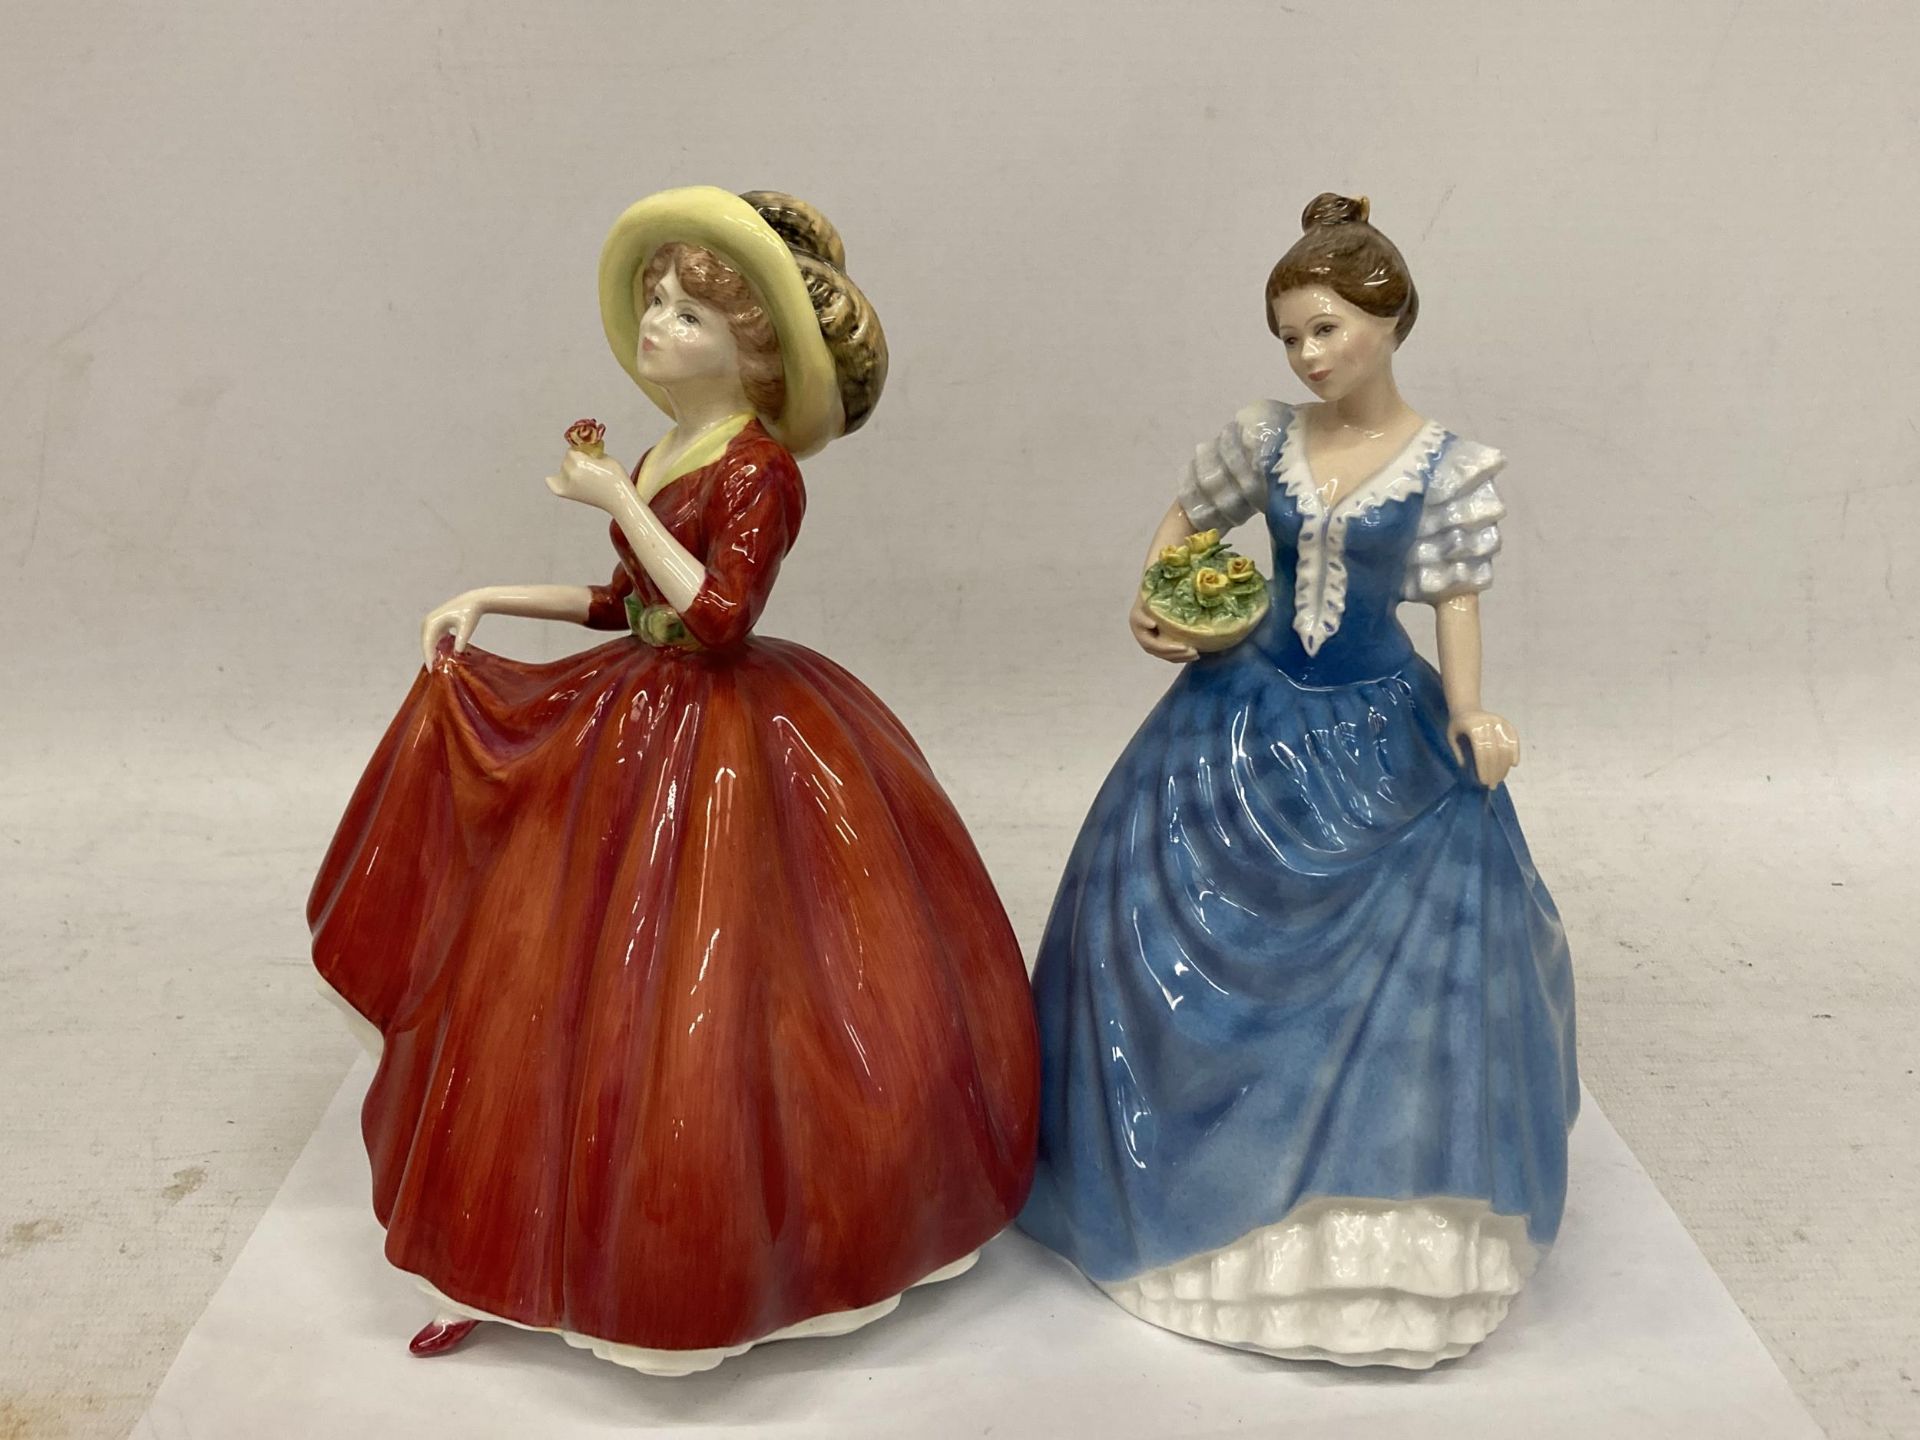 TWO ROYAL DOULTON FIGURINES "A SINGLE RED ROSE" HN 3376 AND "HELEN" HN3601 - Image 3 of 4